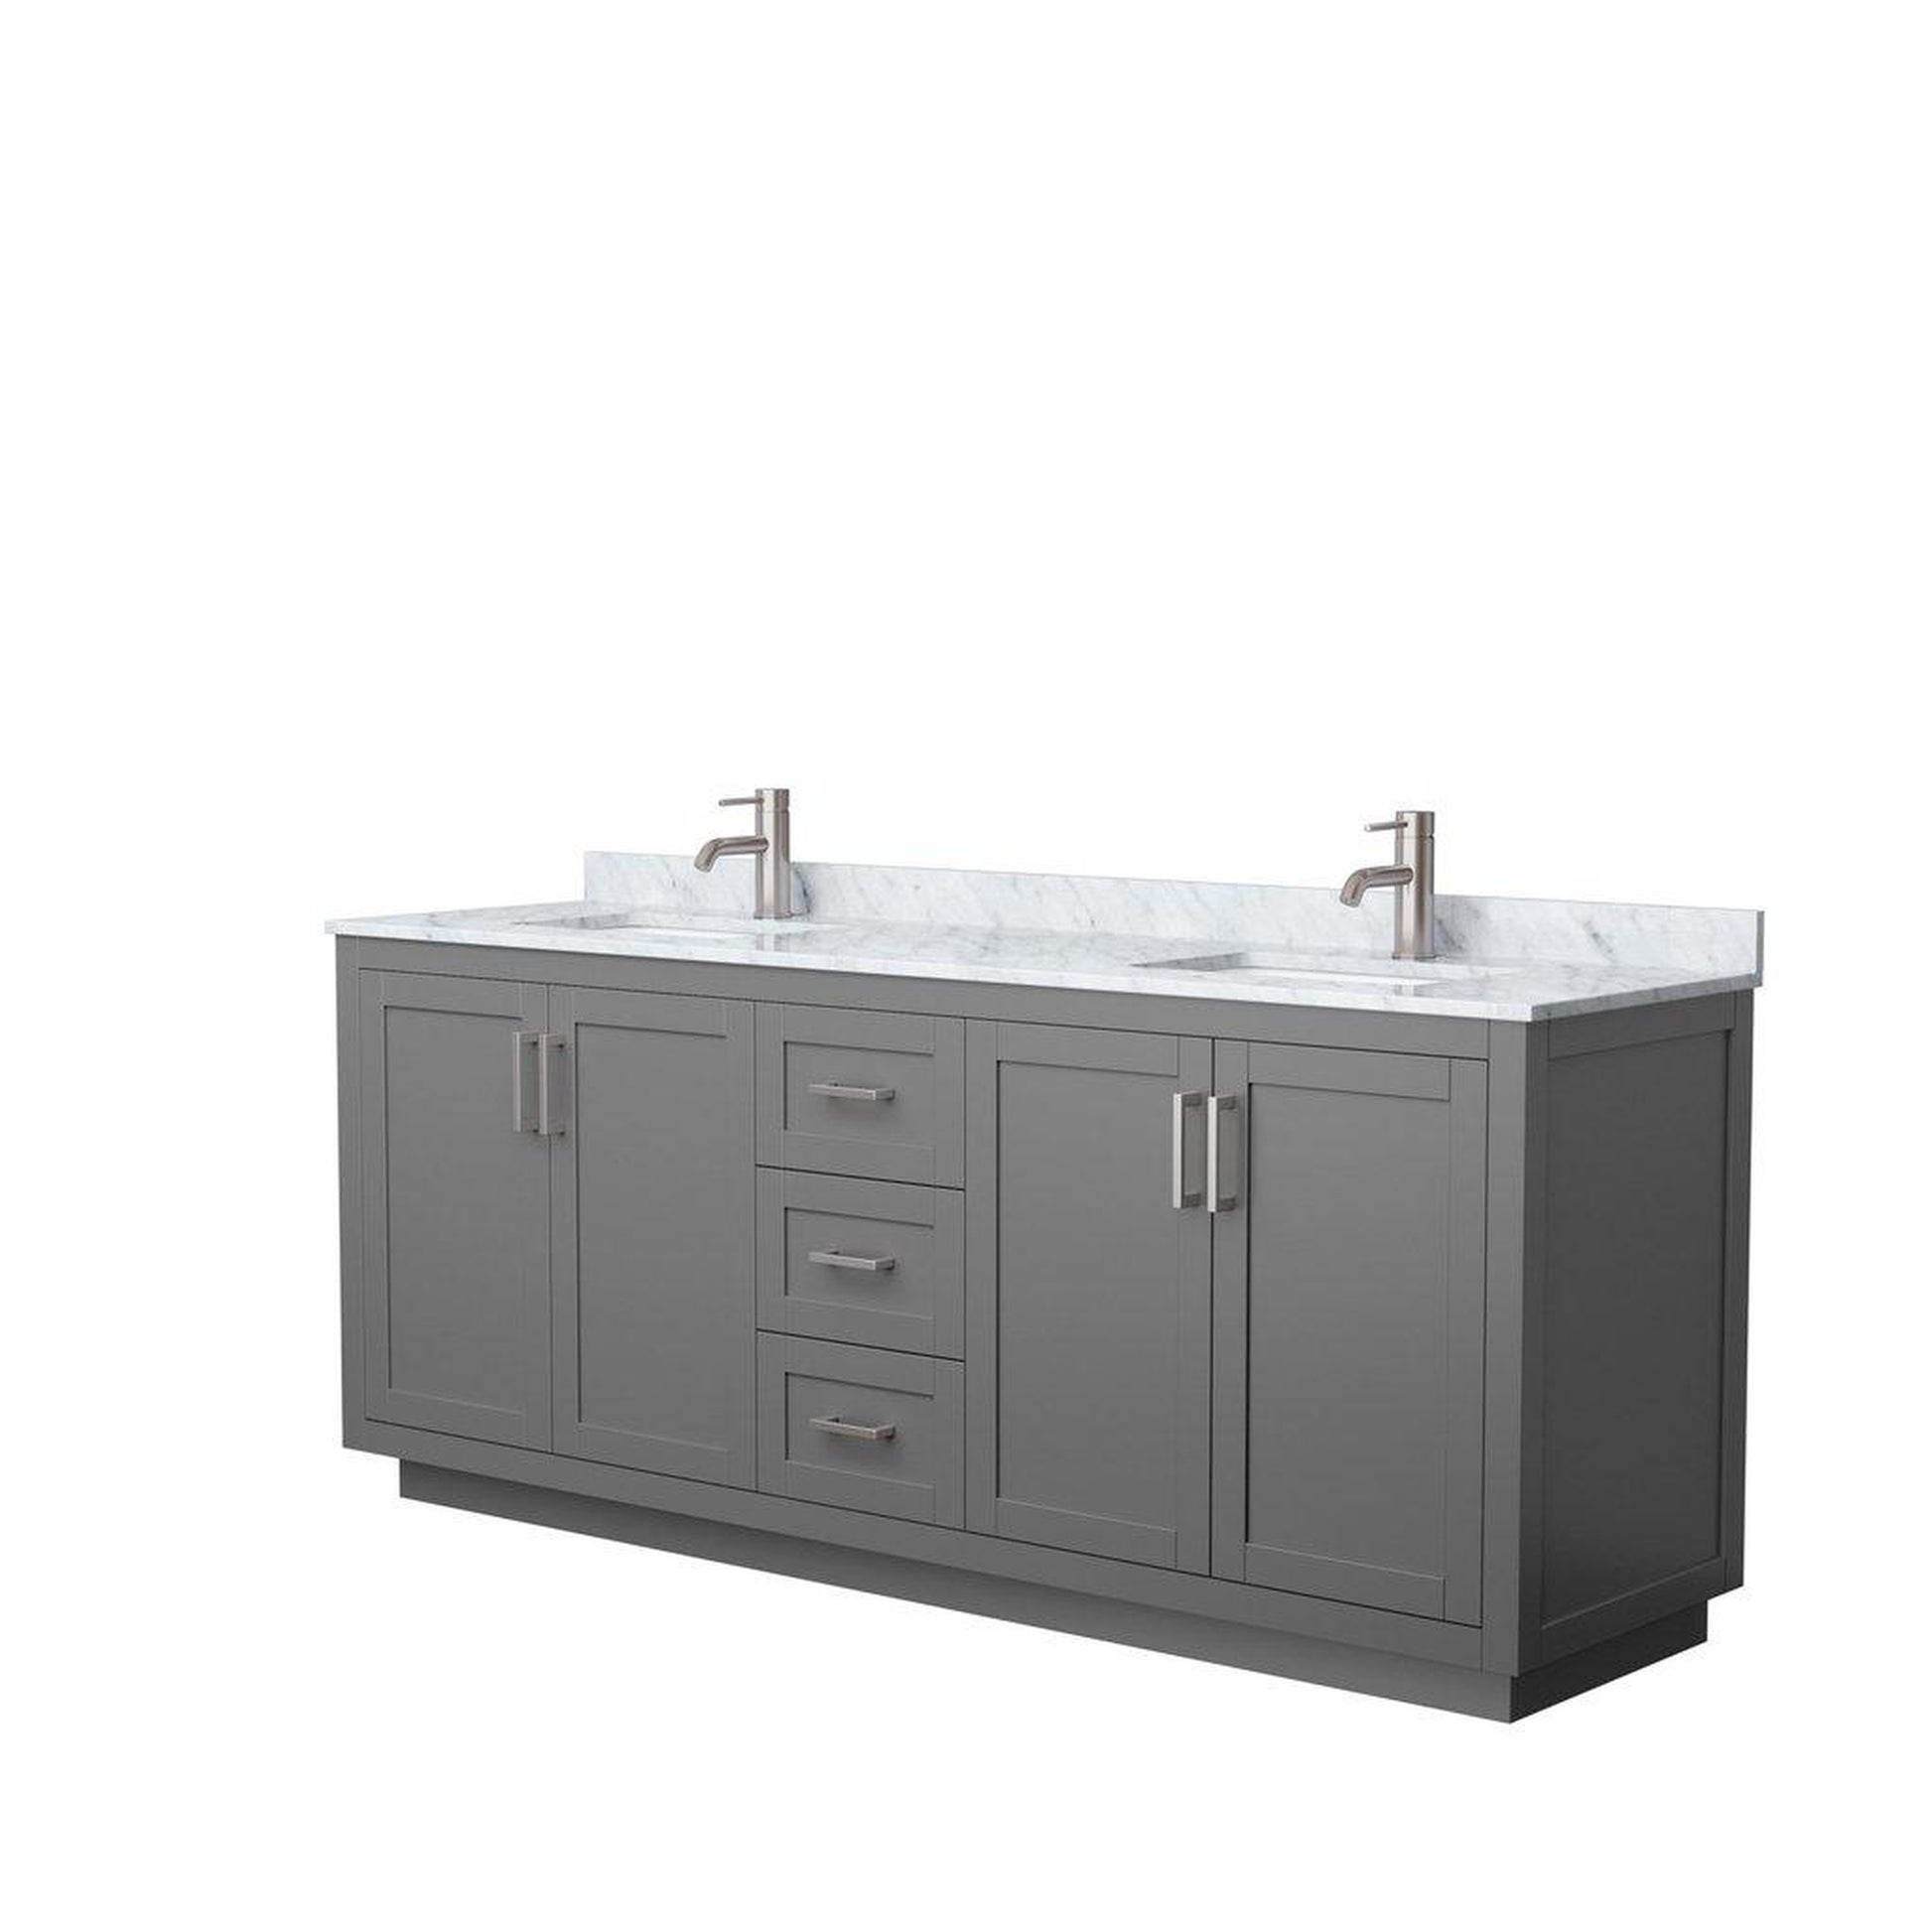 Wyndham Collection Miranda 80" Double Bathroom Dark Gray Vanity Set With White Carrara Marble Countertop, Undermount Square Sink, And Brushed Nickel Trim